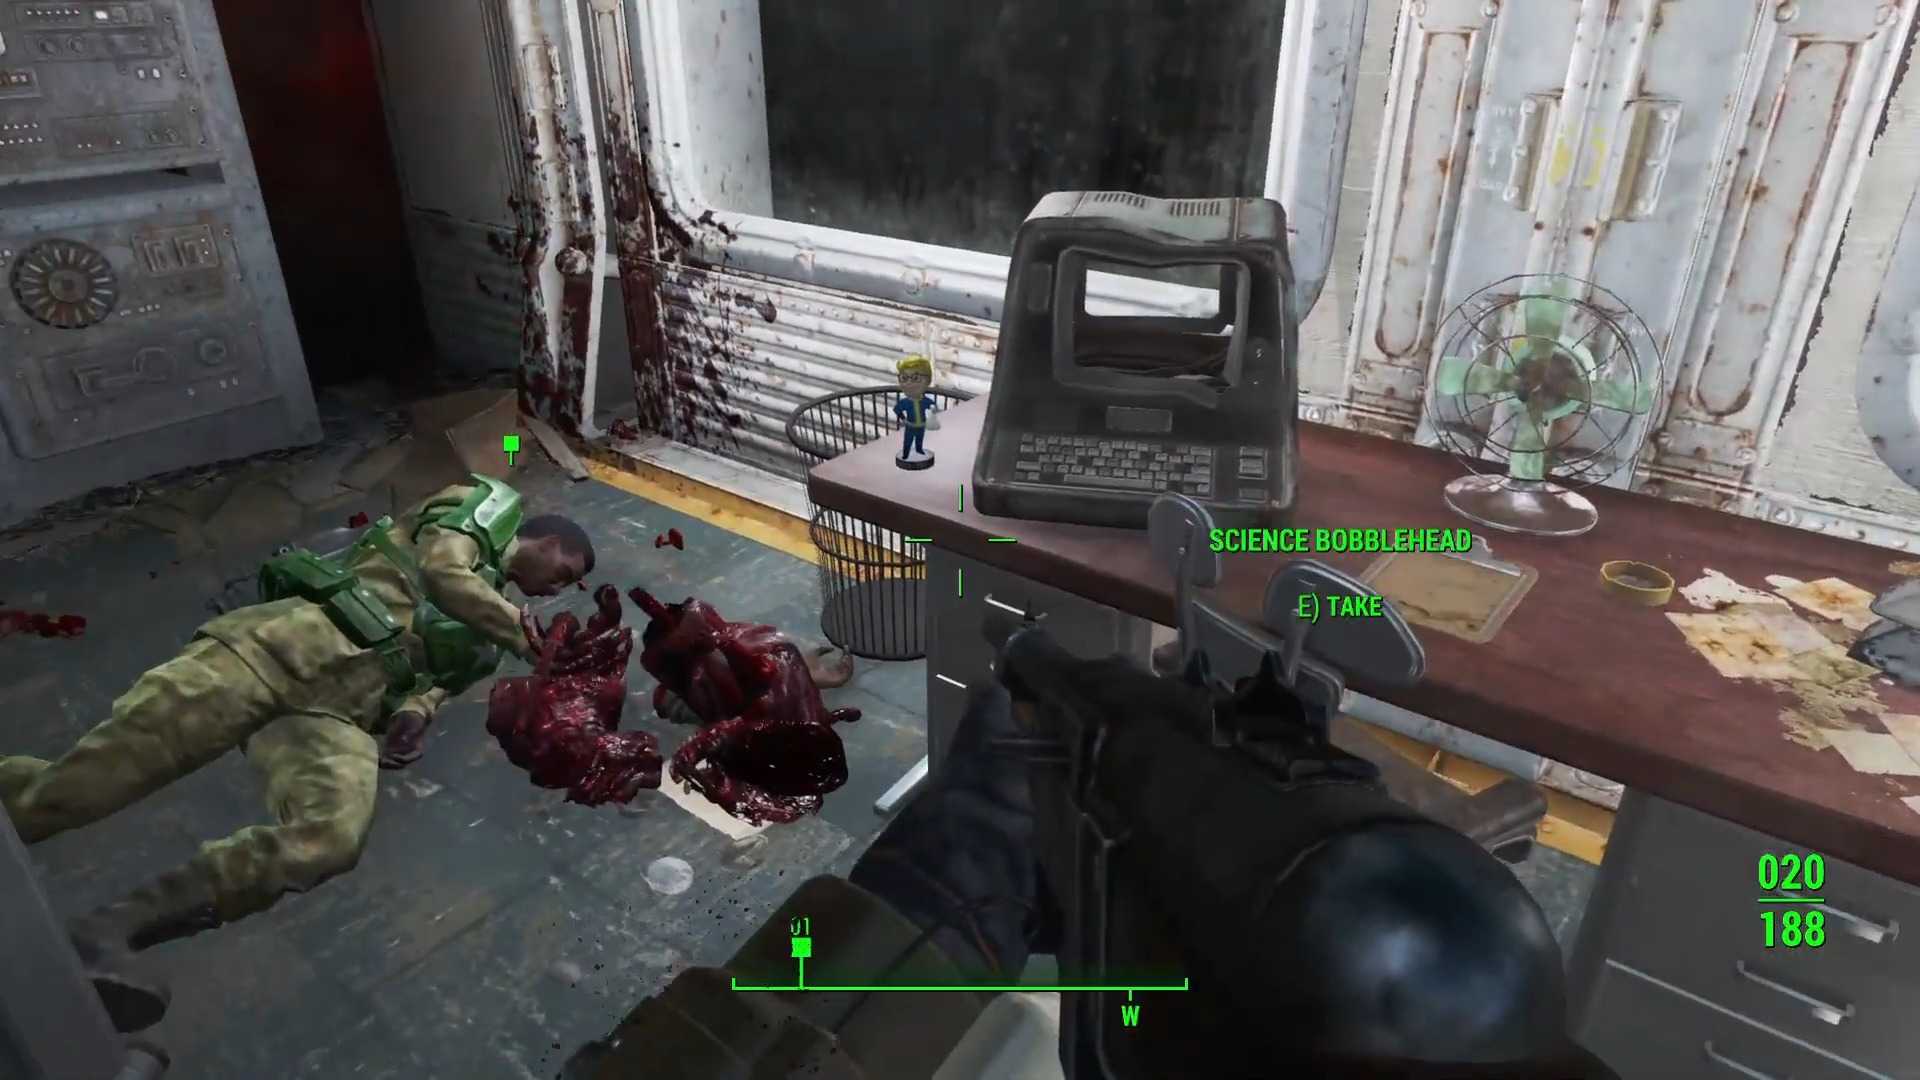 The Science Bobblehead in Fallout 4